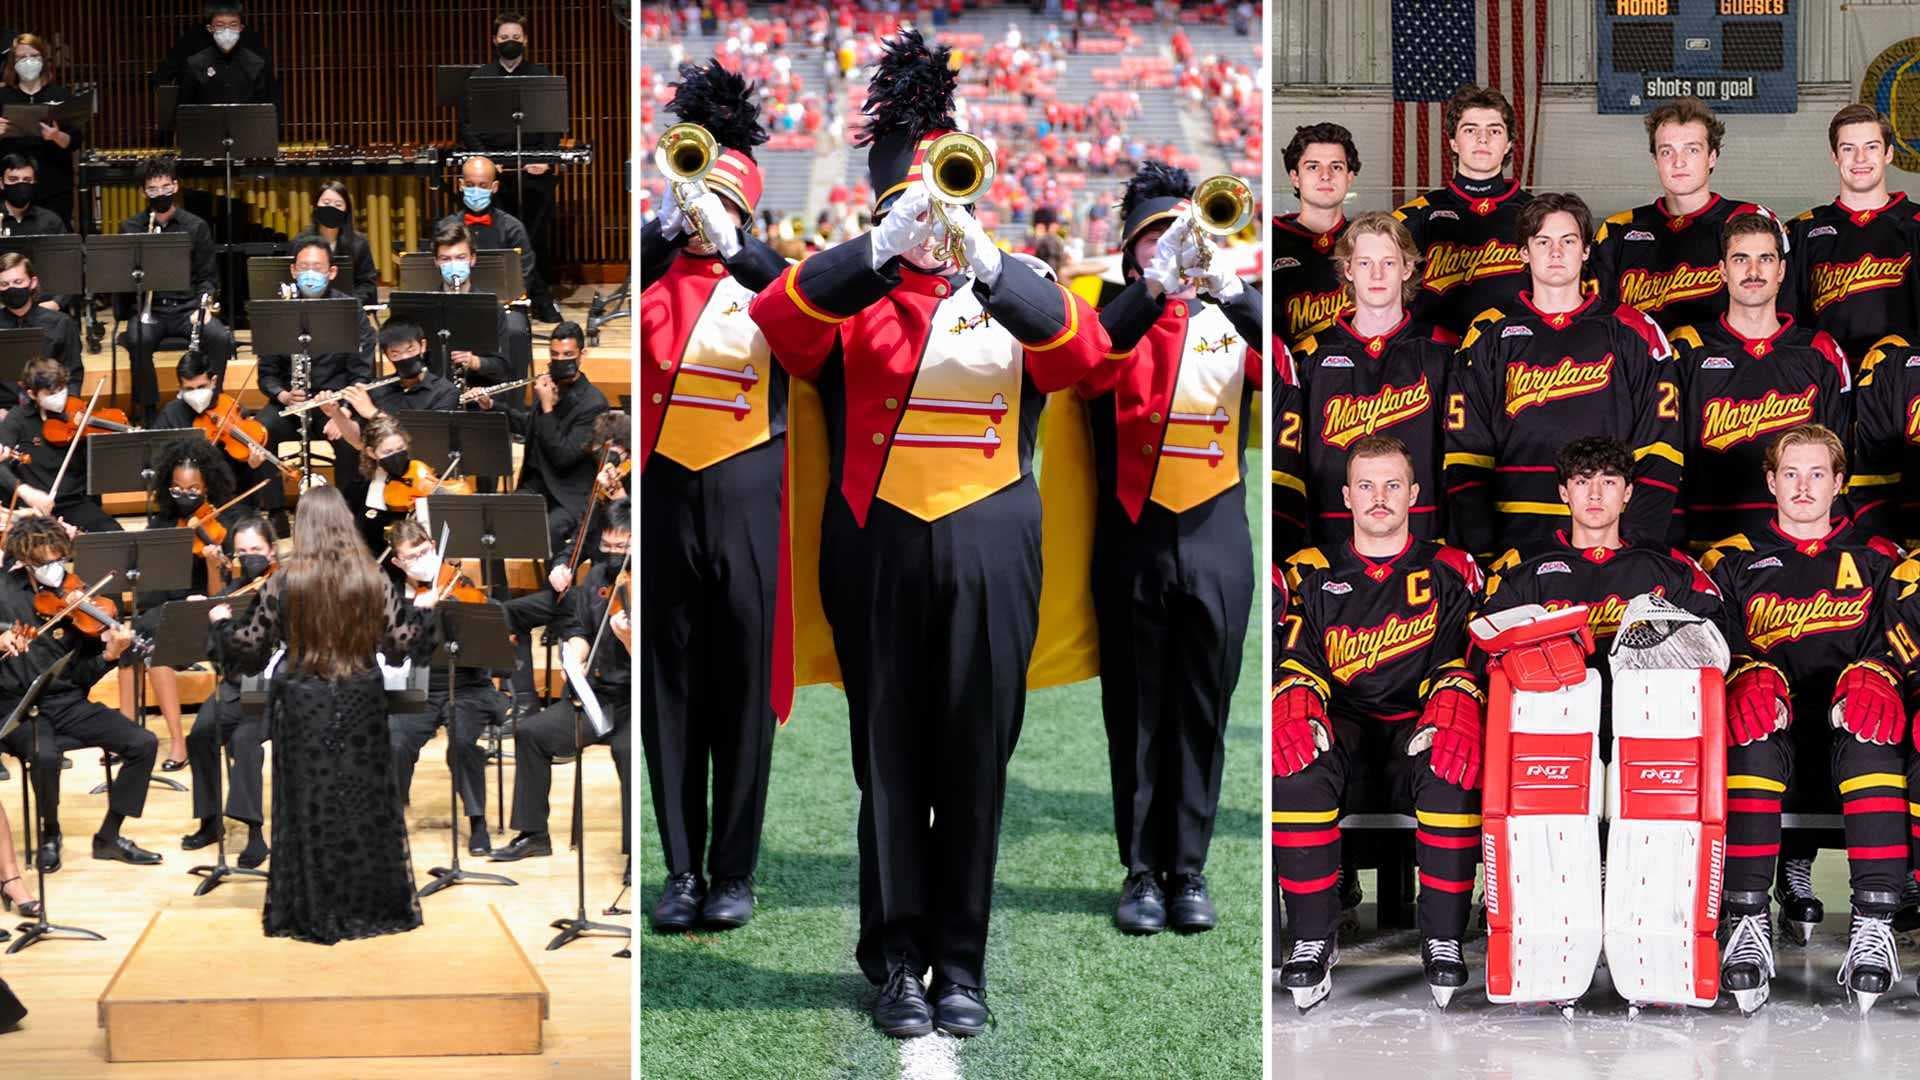 Gamer Symphony Orchestra performs; trumpet players from the Mighty Sound of Maryland play on the field; UMD's hockey club team on the ice